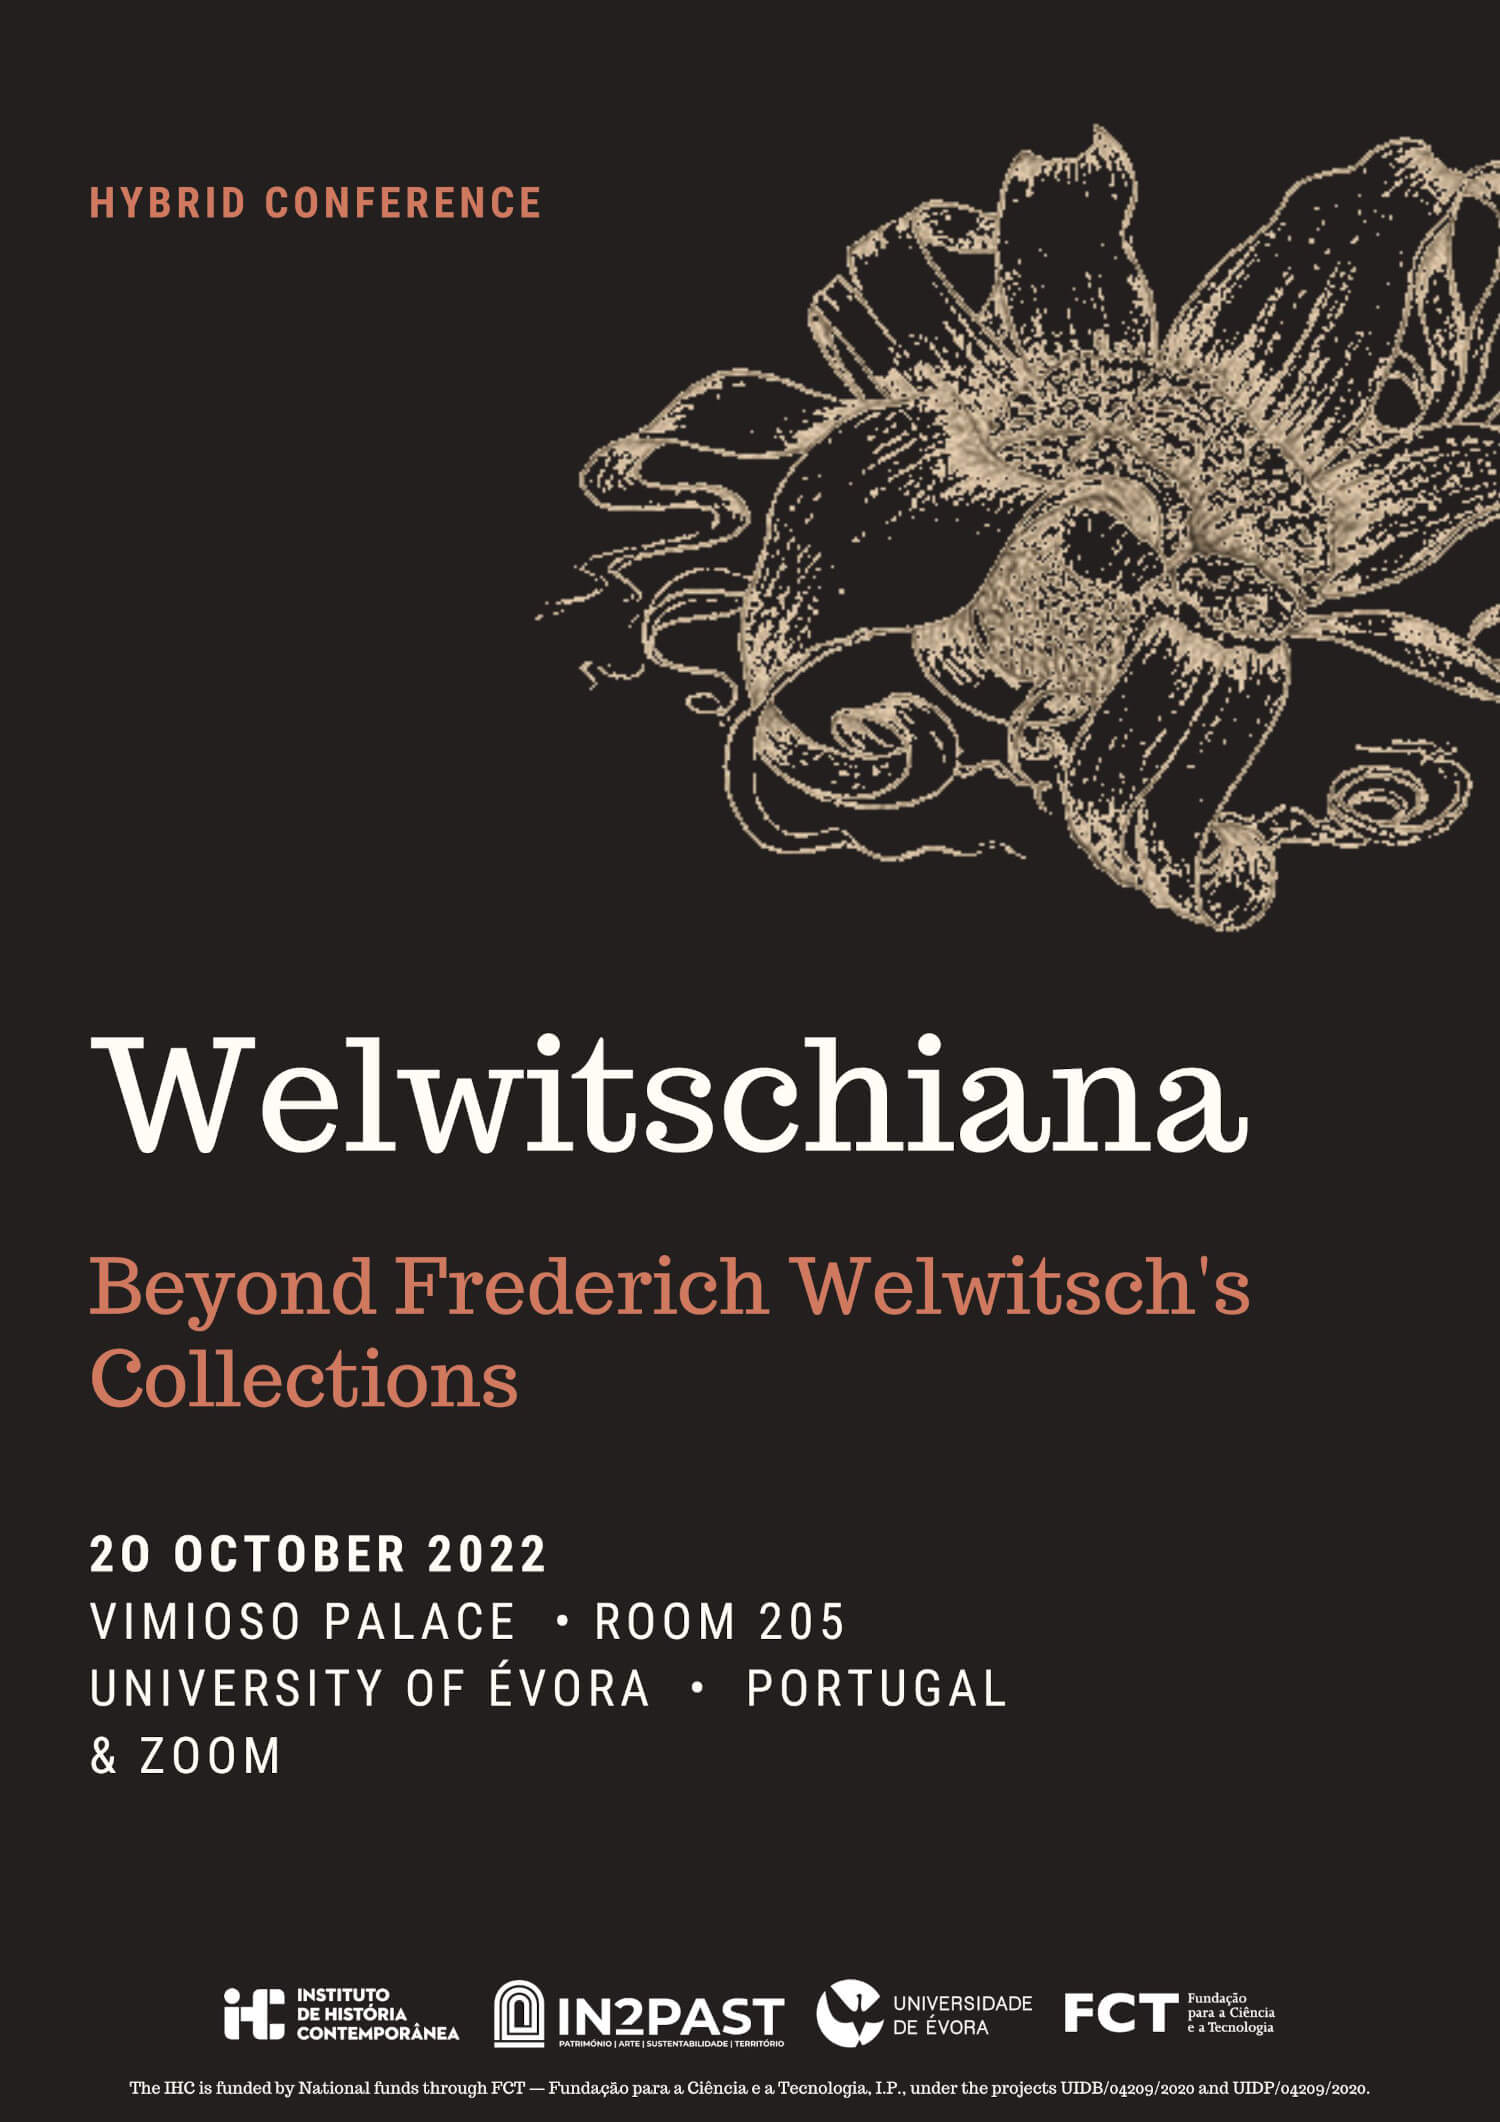 Poster for the international conference "Welwitschiana: Beyond Frederich Welwitsch’s Collections". 20 October 2022 at the University of Évora and via Zoom.